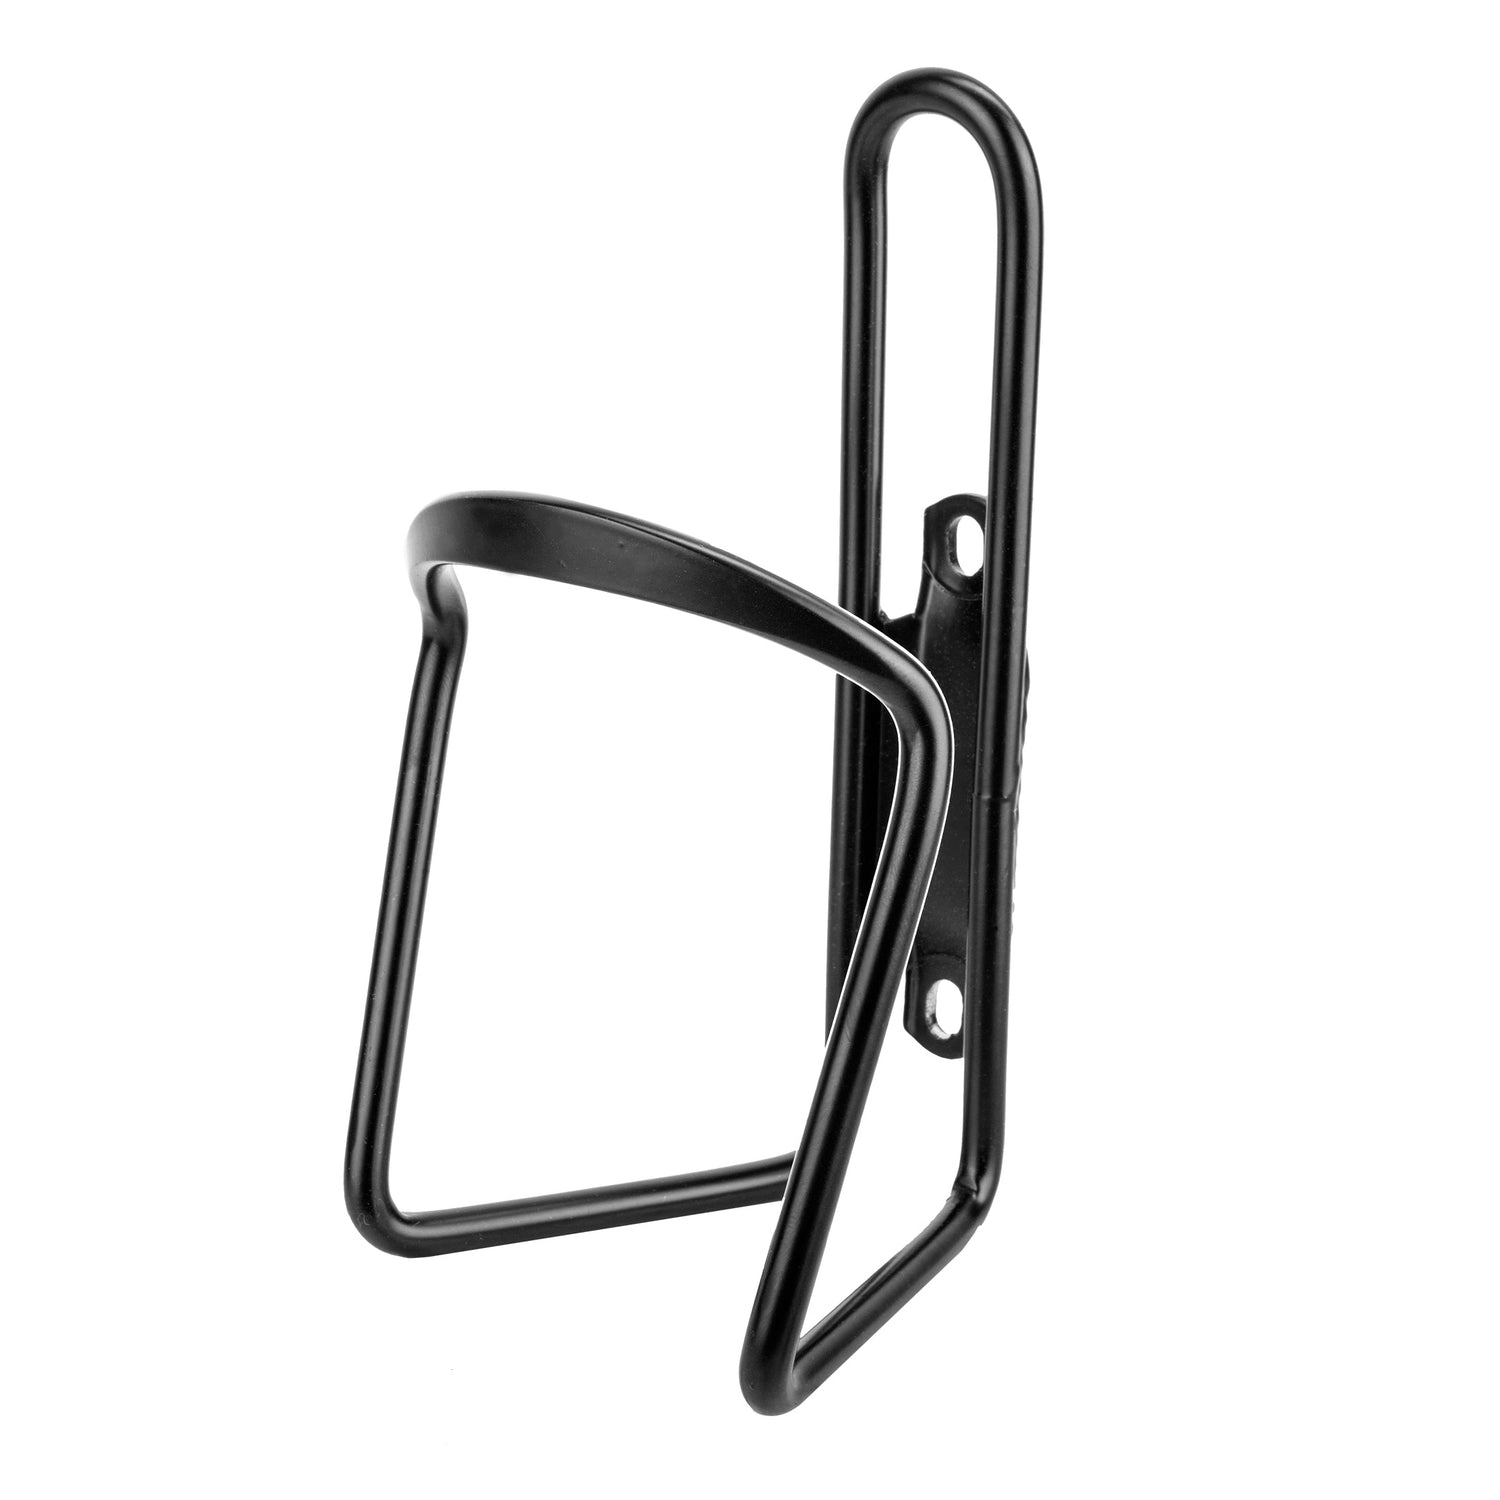 Water Bottle Cage for Bikes in Black